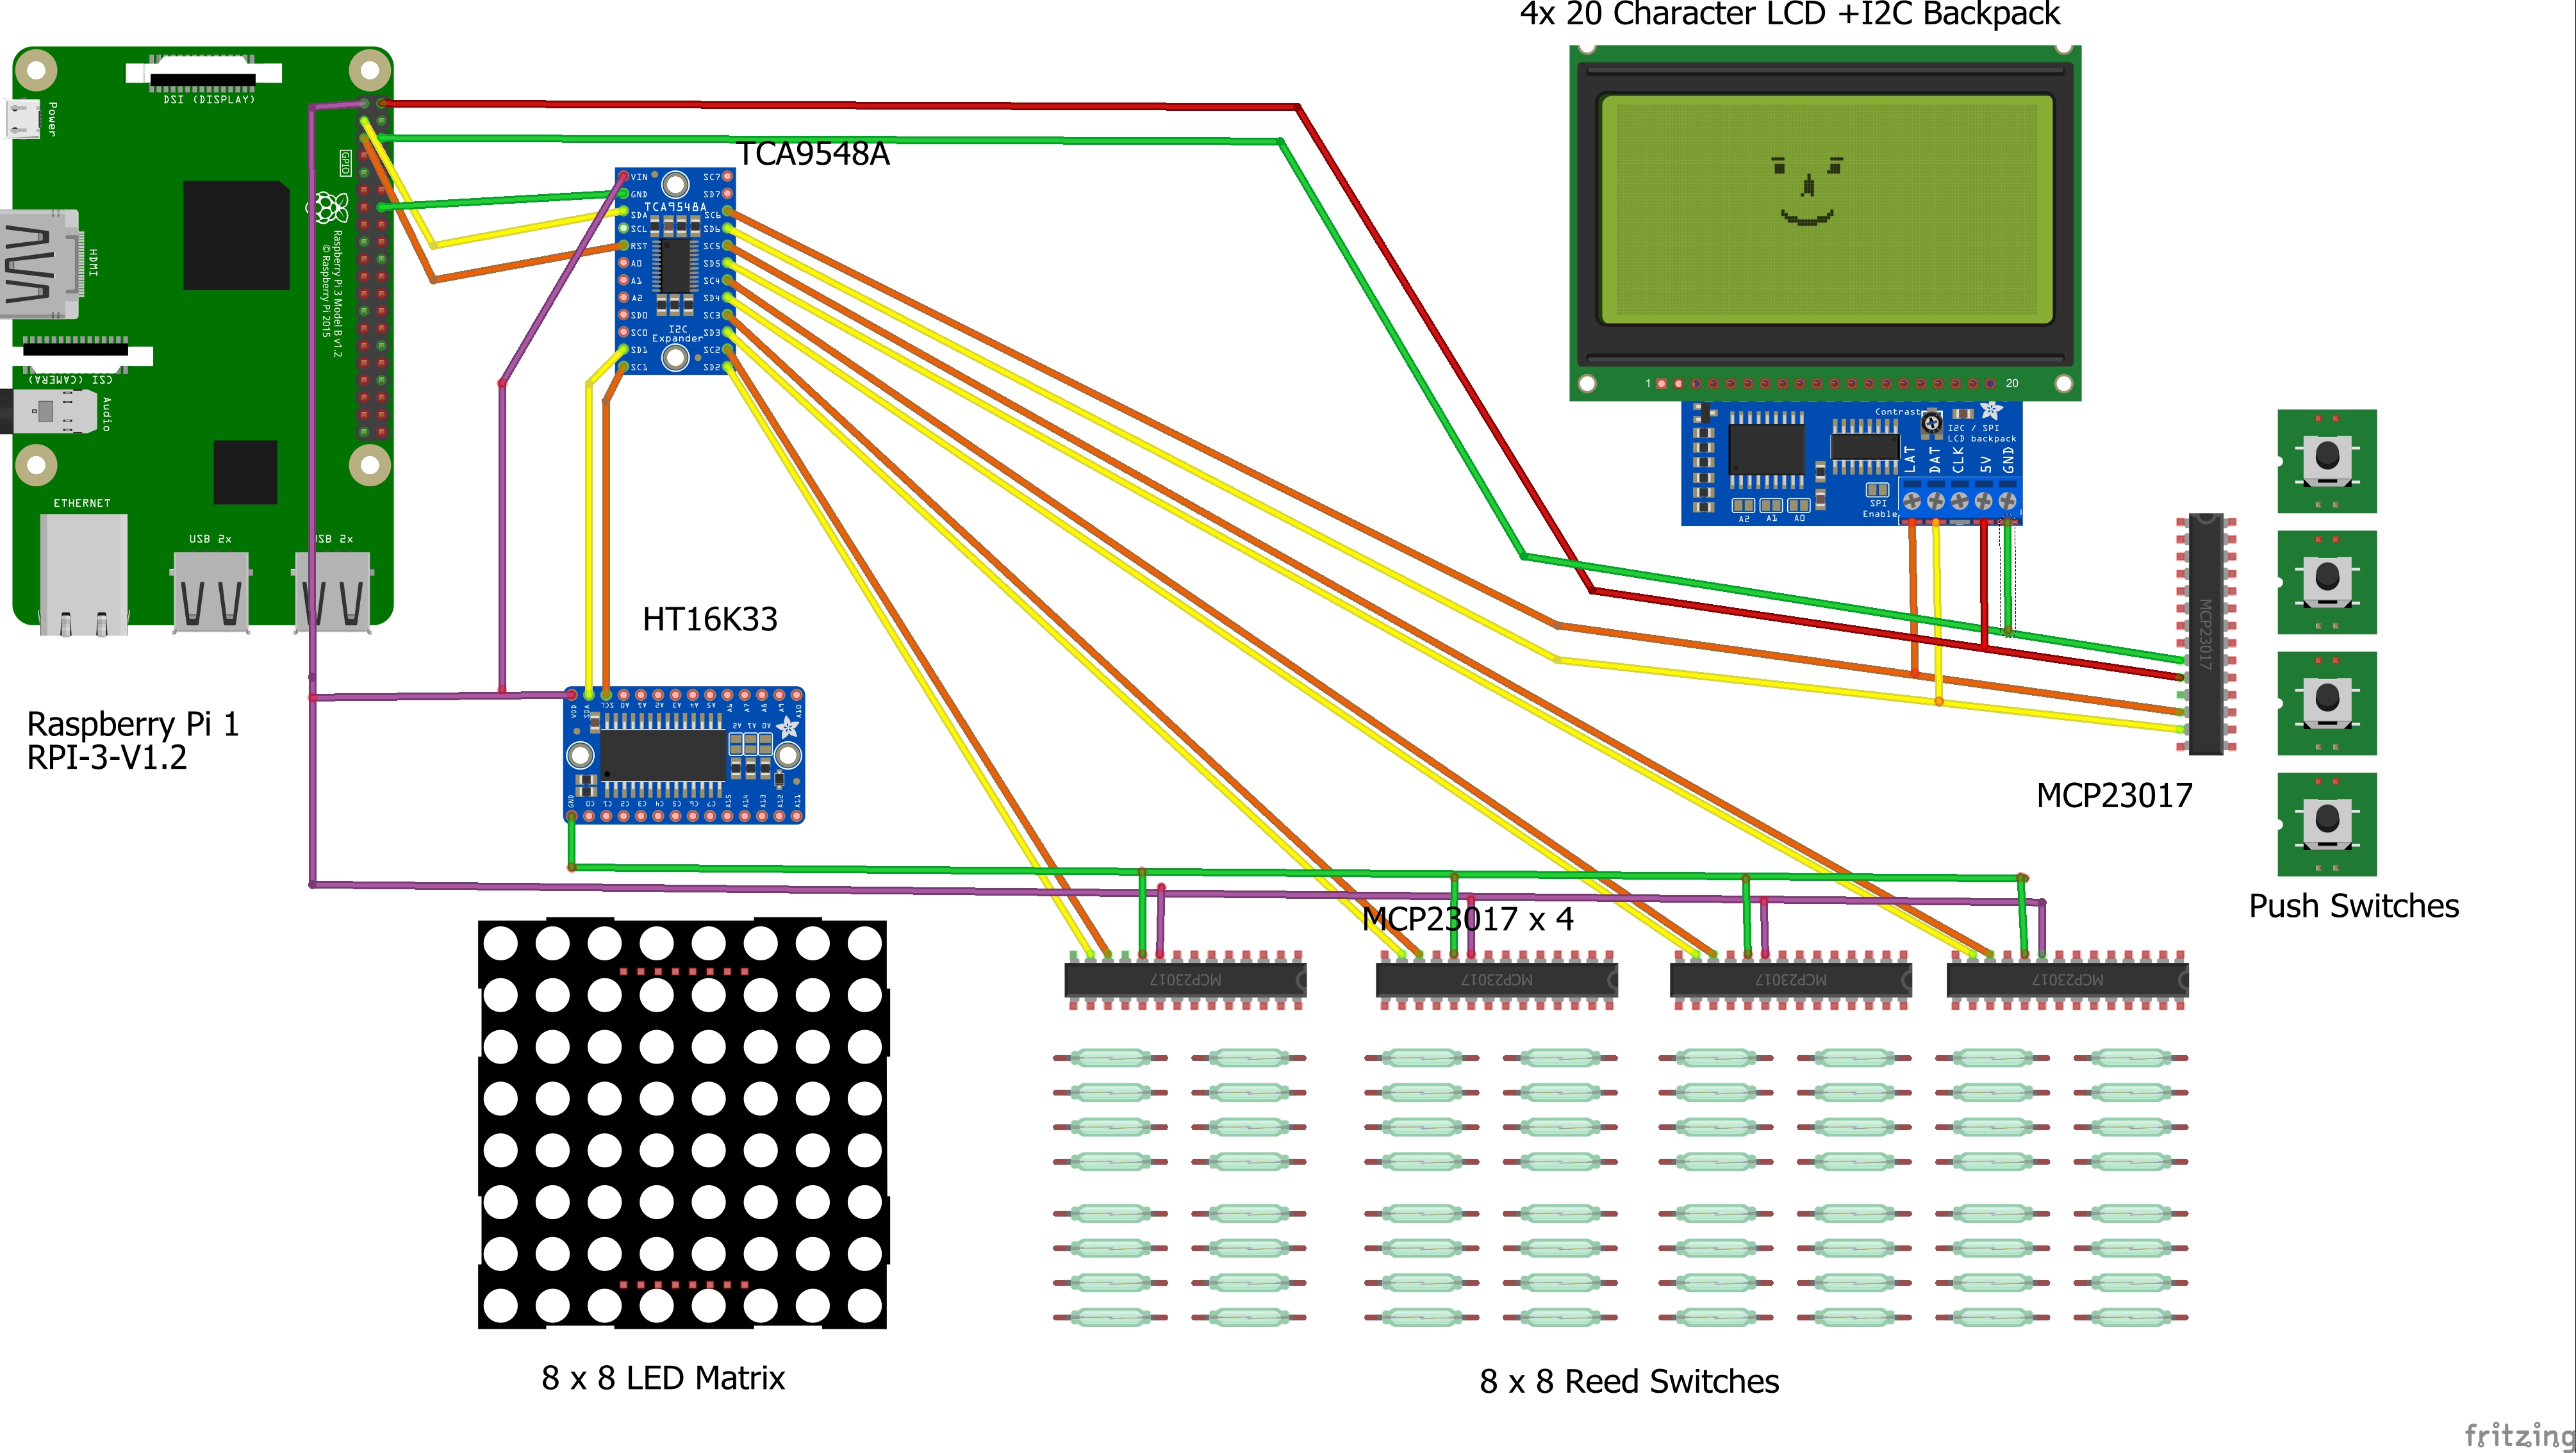 The DGT Projects Electronic Chess Board (E-Board) - USB Connection